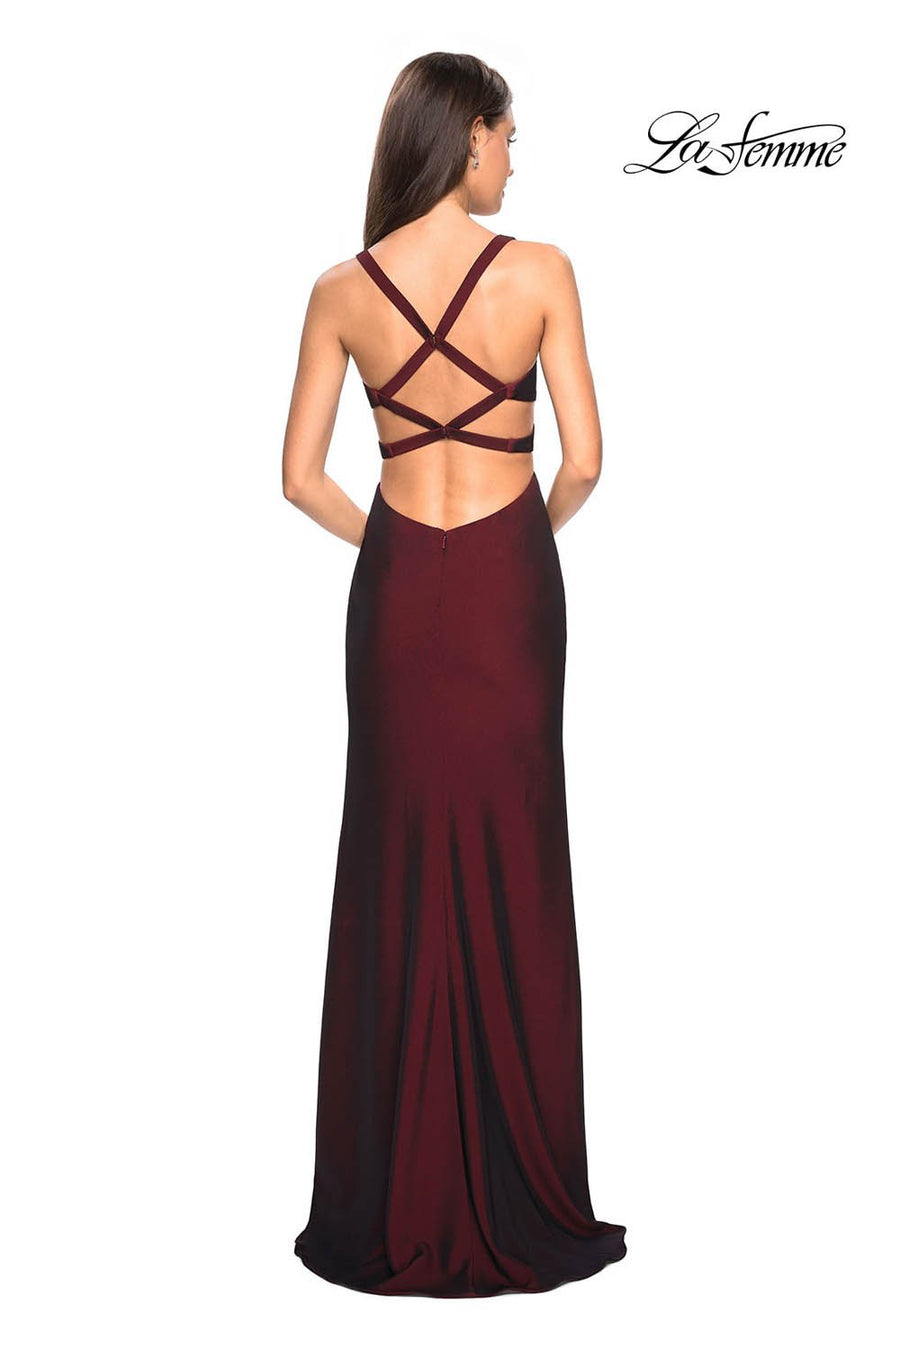 La Femme 27785 prom dress images.  La Femme 27785 is available in these colors: Burgundy, Navy.